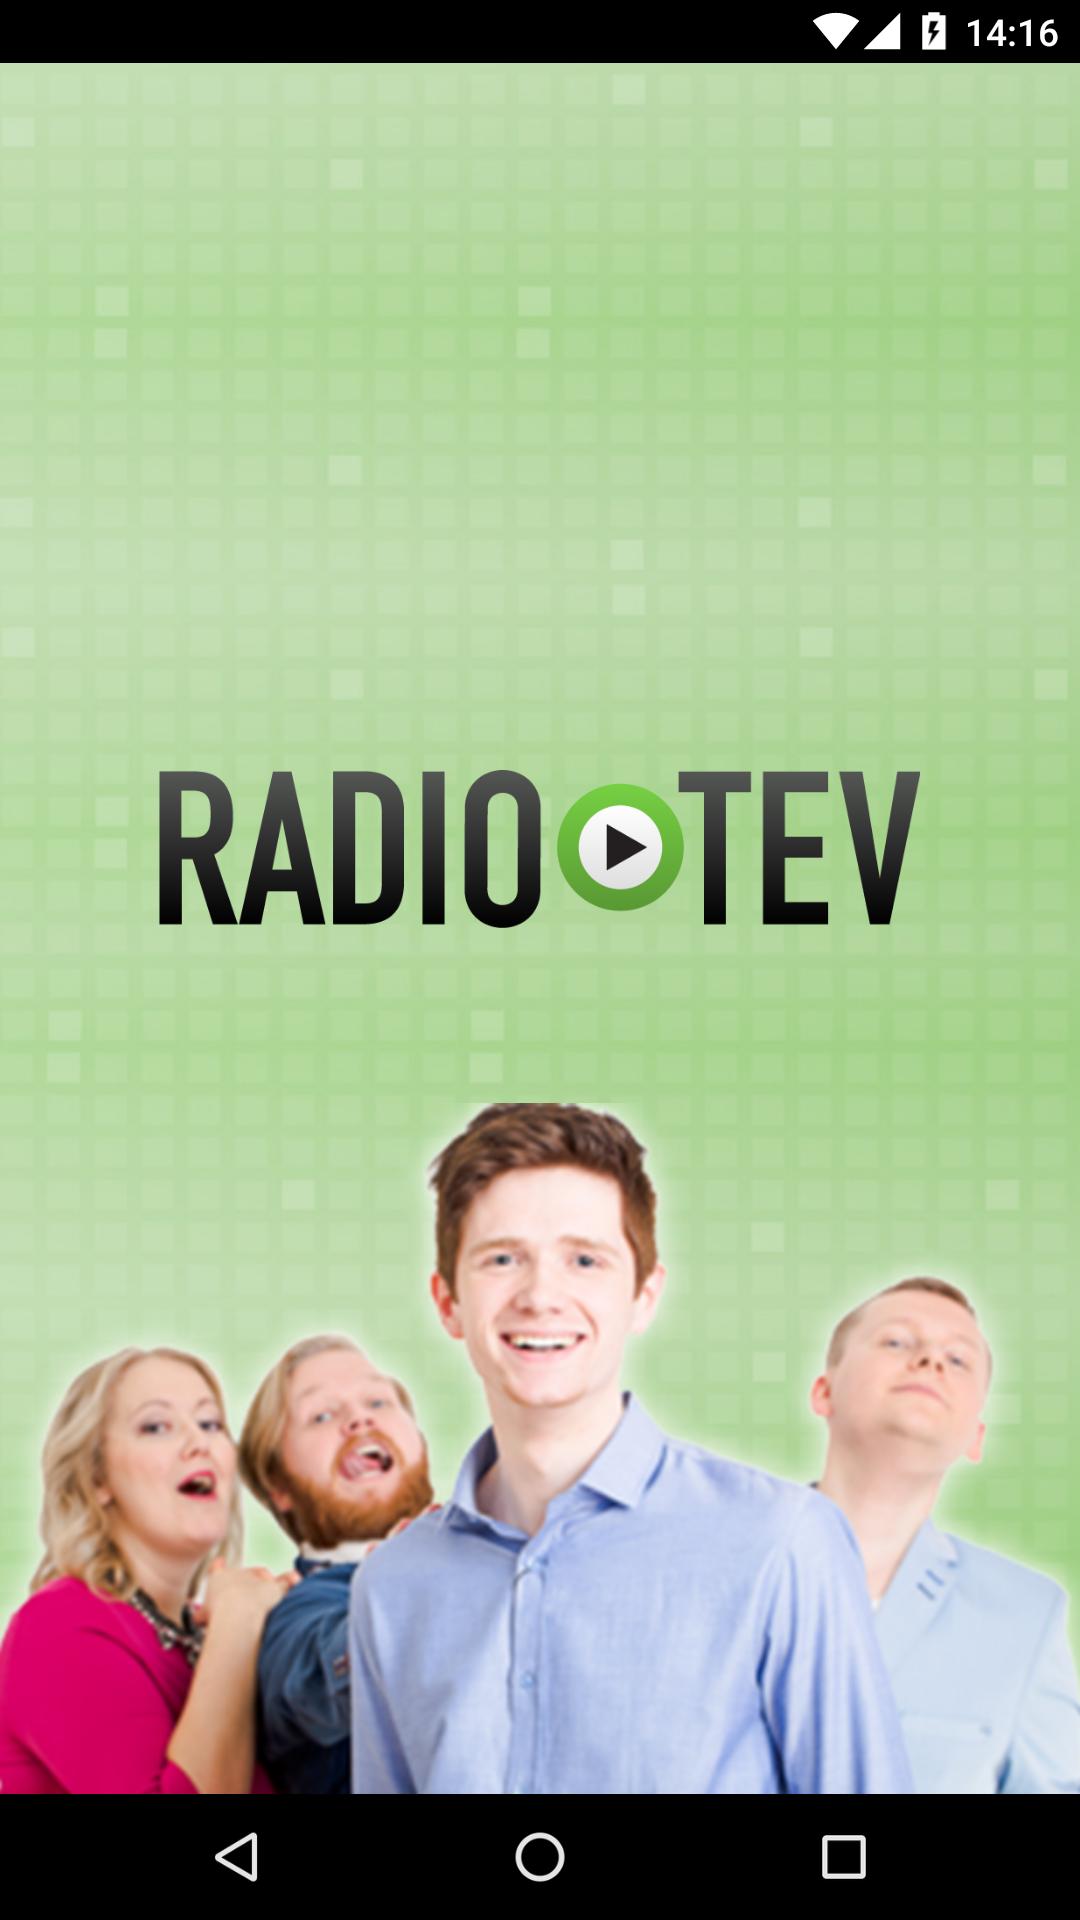 Radio TEV for Android - APK Download